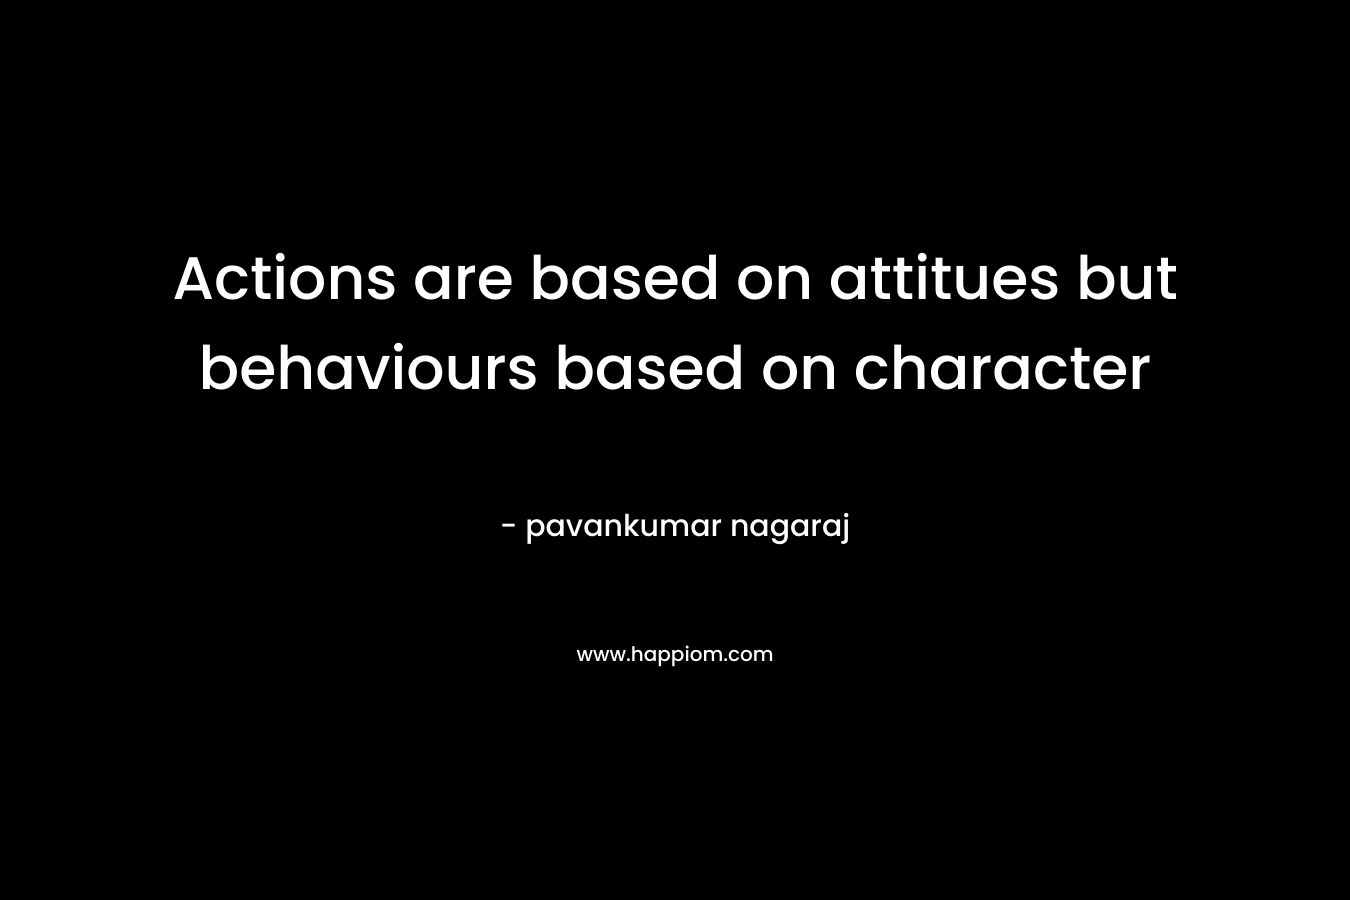 Actions are based on attitues but behaviours based on character – pavankumar nagaraj